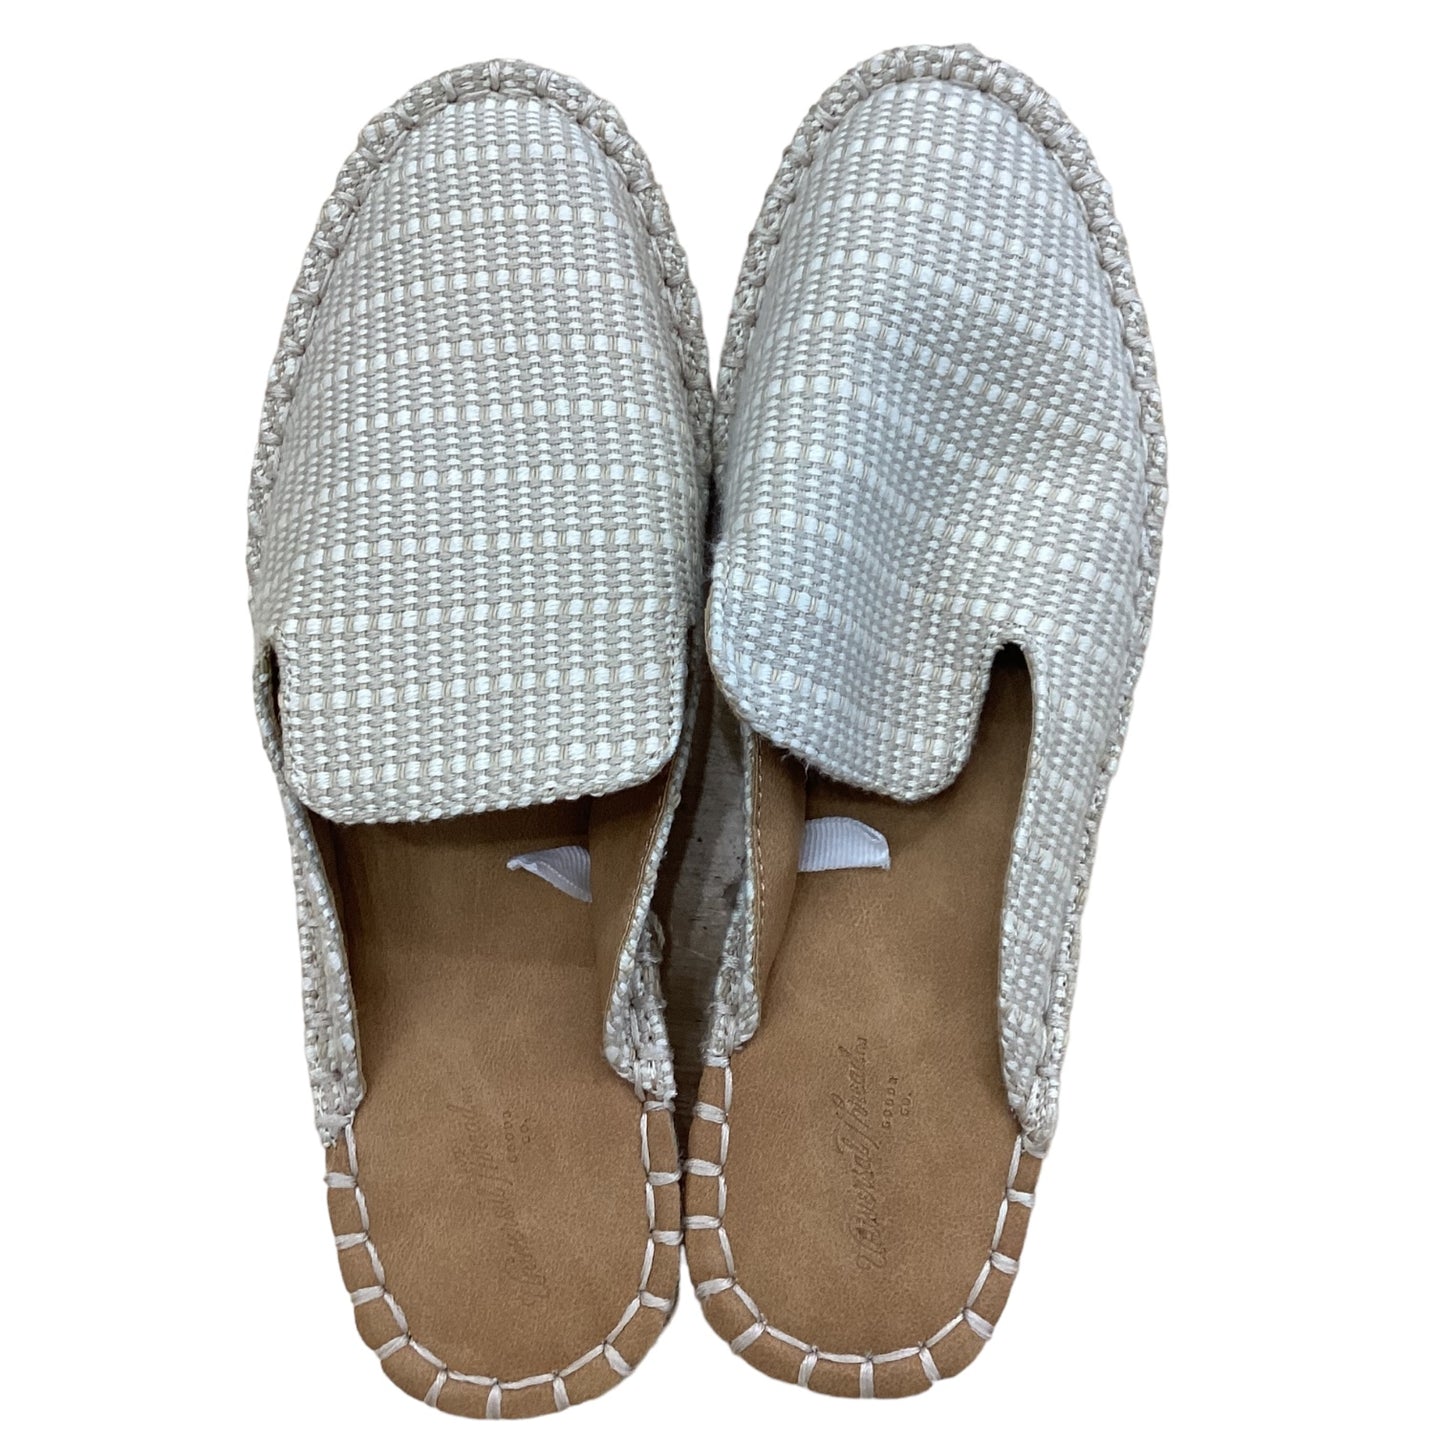 Shoes Flats By Universal Thread  Size: 7